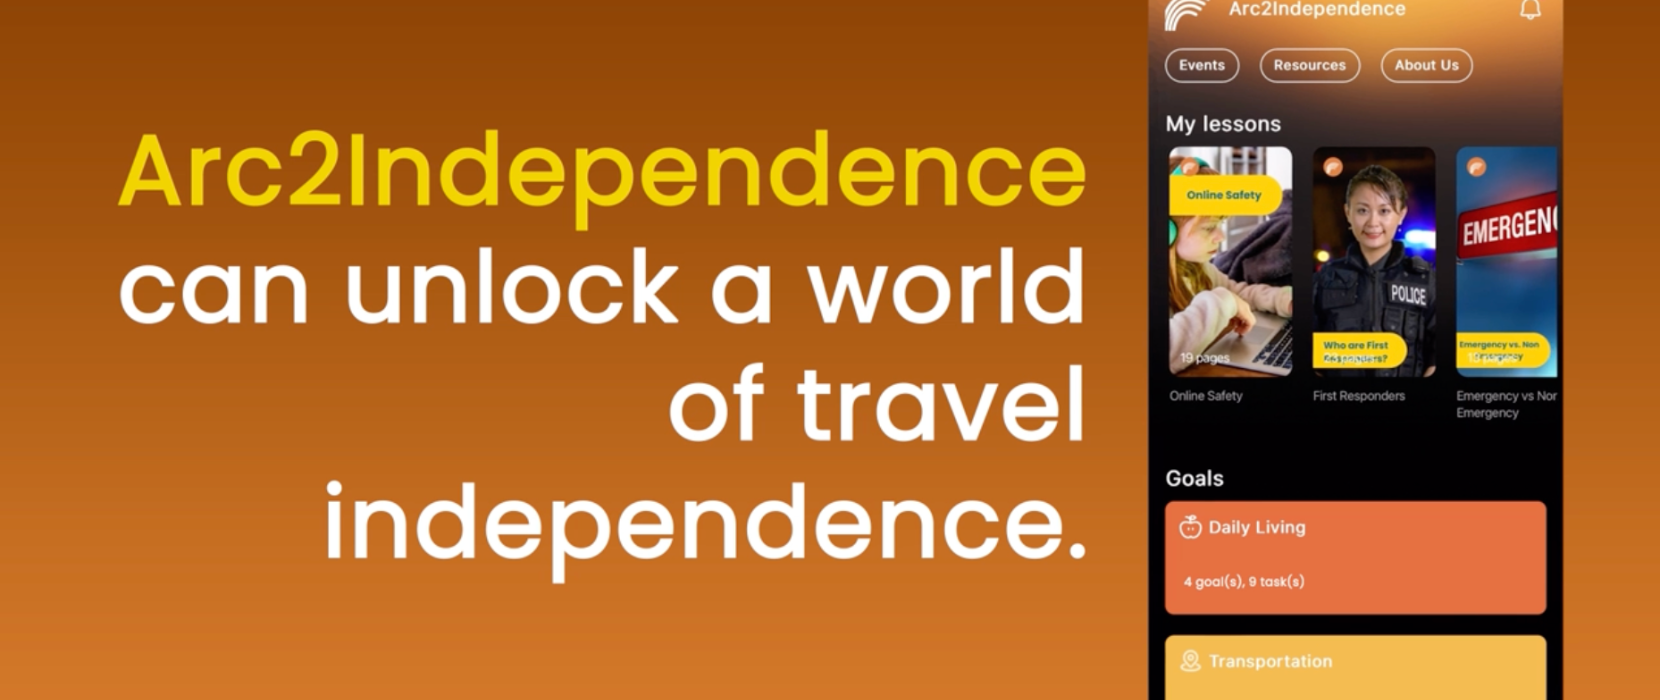 arc2independence can unlock a world of travel independence